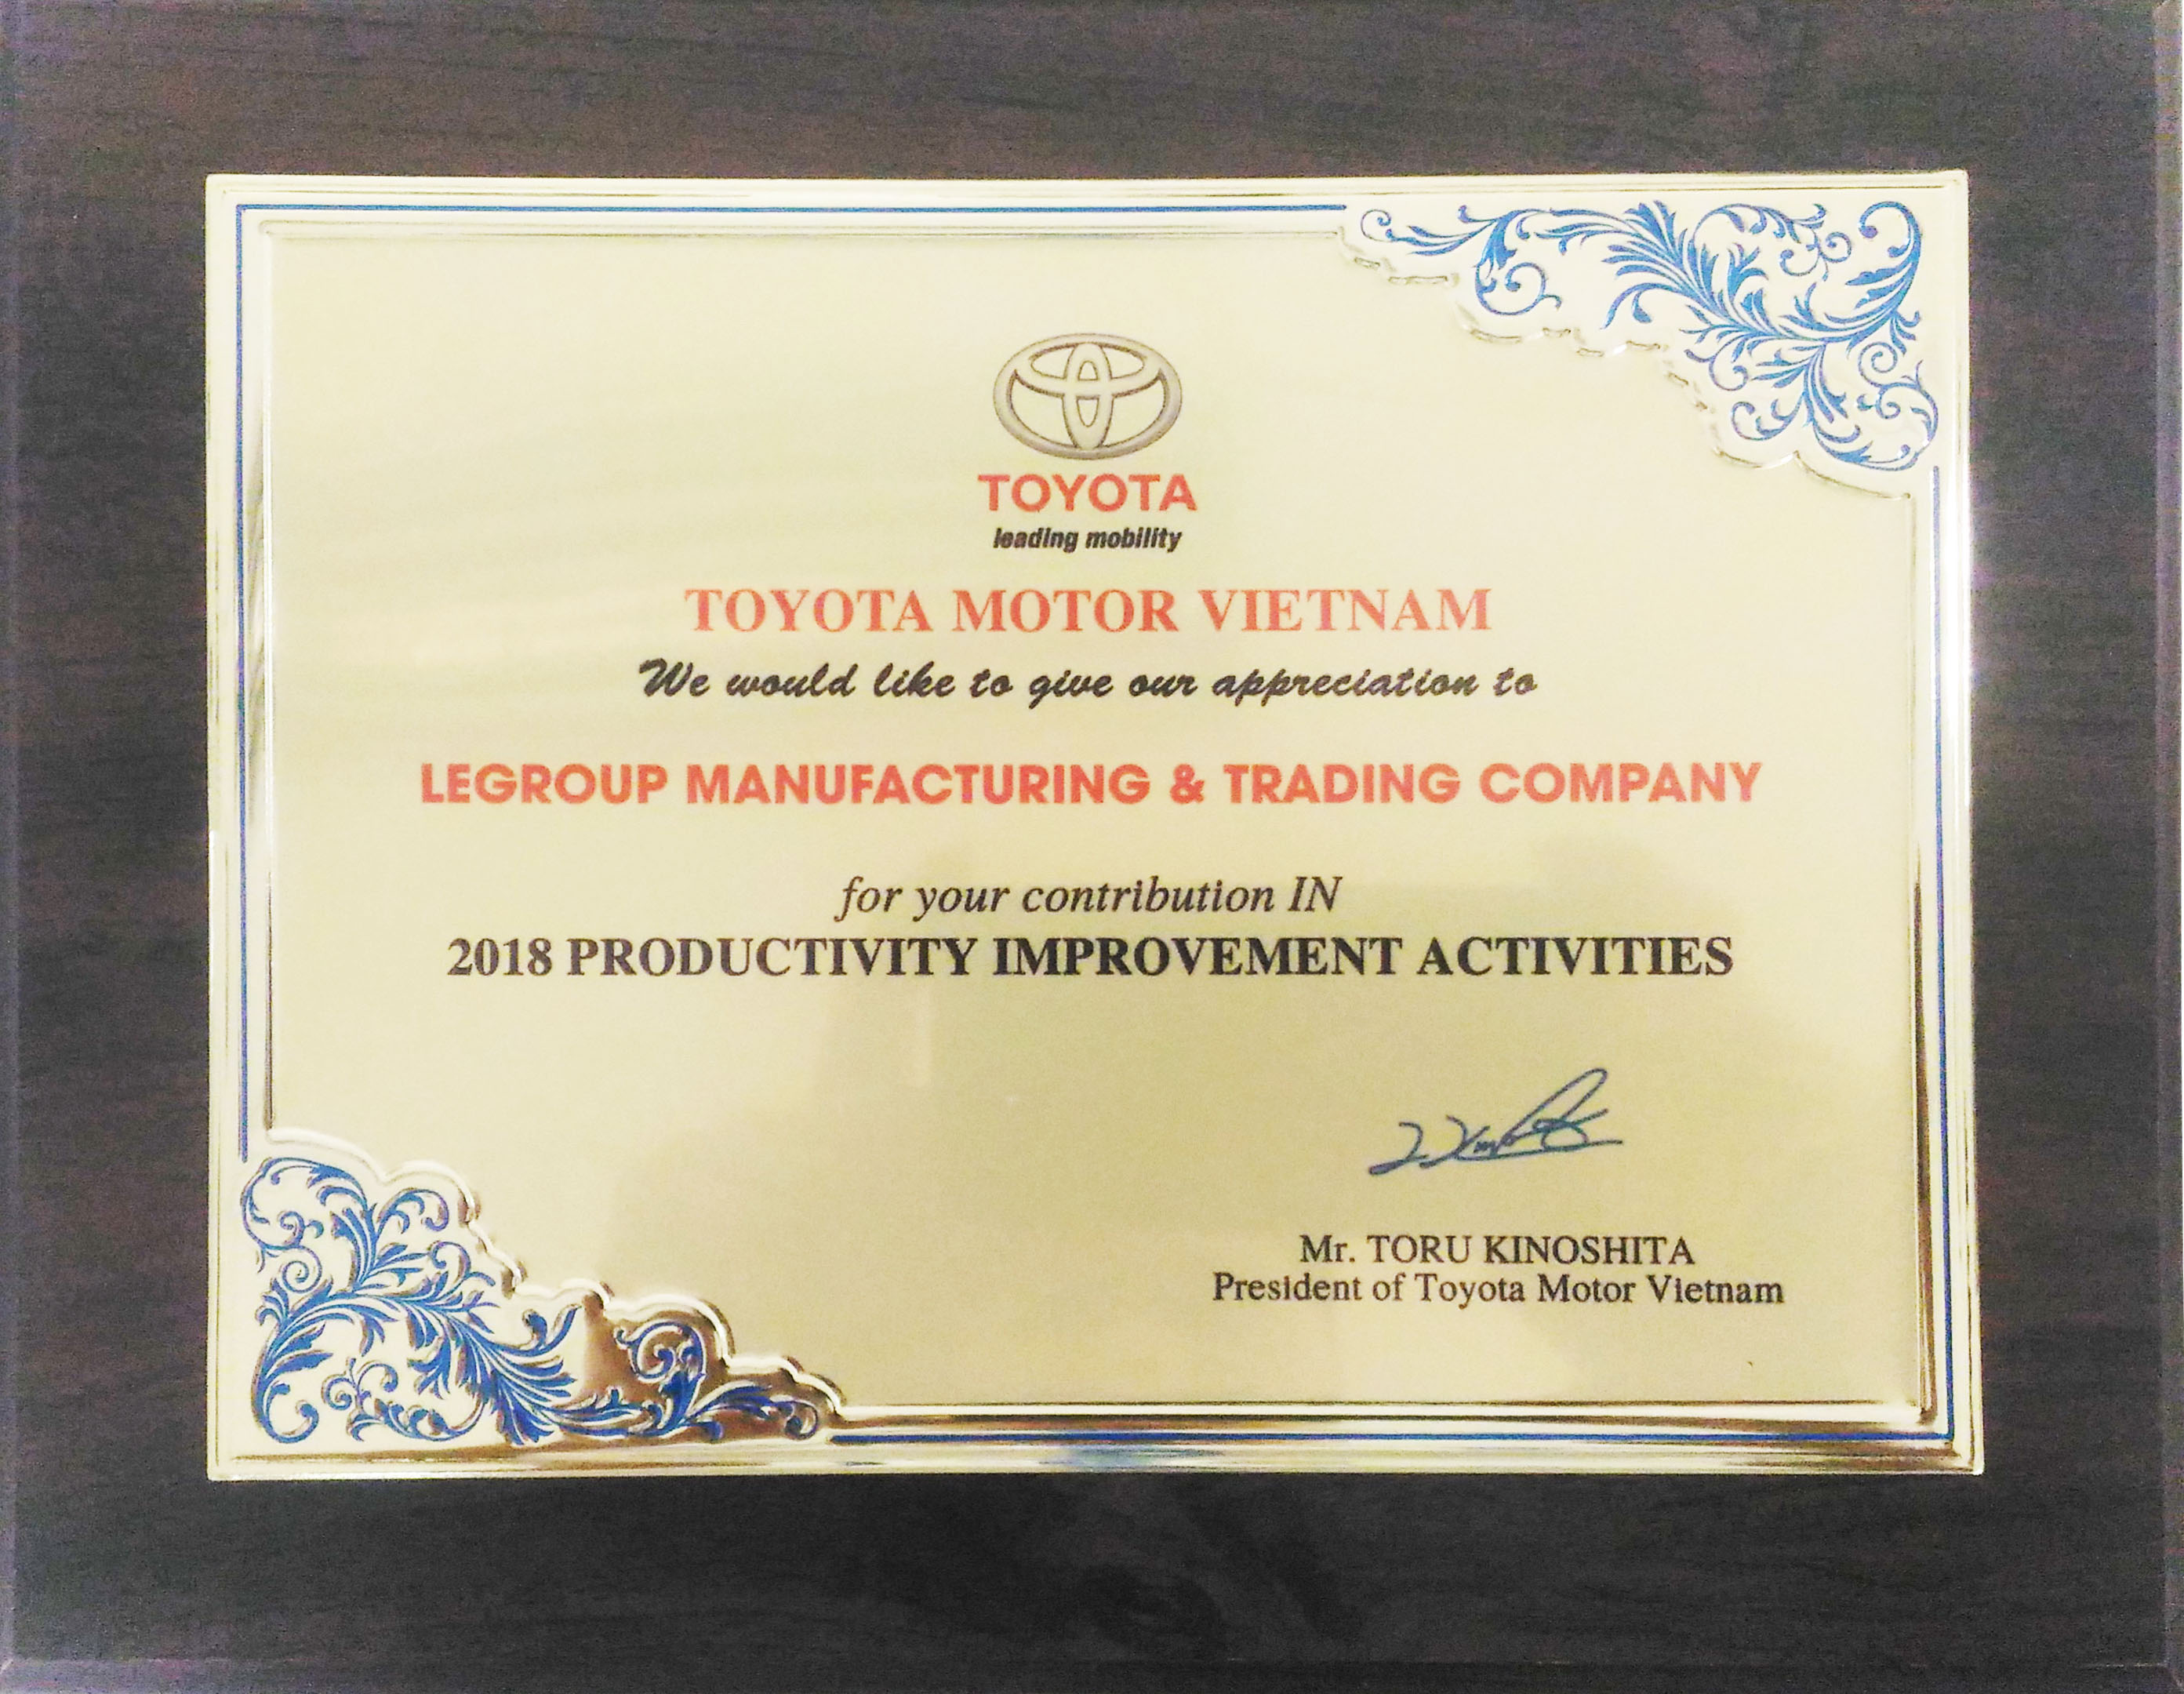 LEGROUP RECEIVES AWARD FROM TOYOTA VIETNAM FOR “2018 PRODUCTIVITY IMPROVEMENT ACTIVITIES”